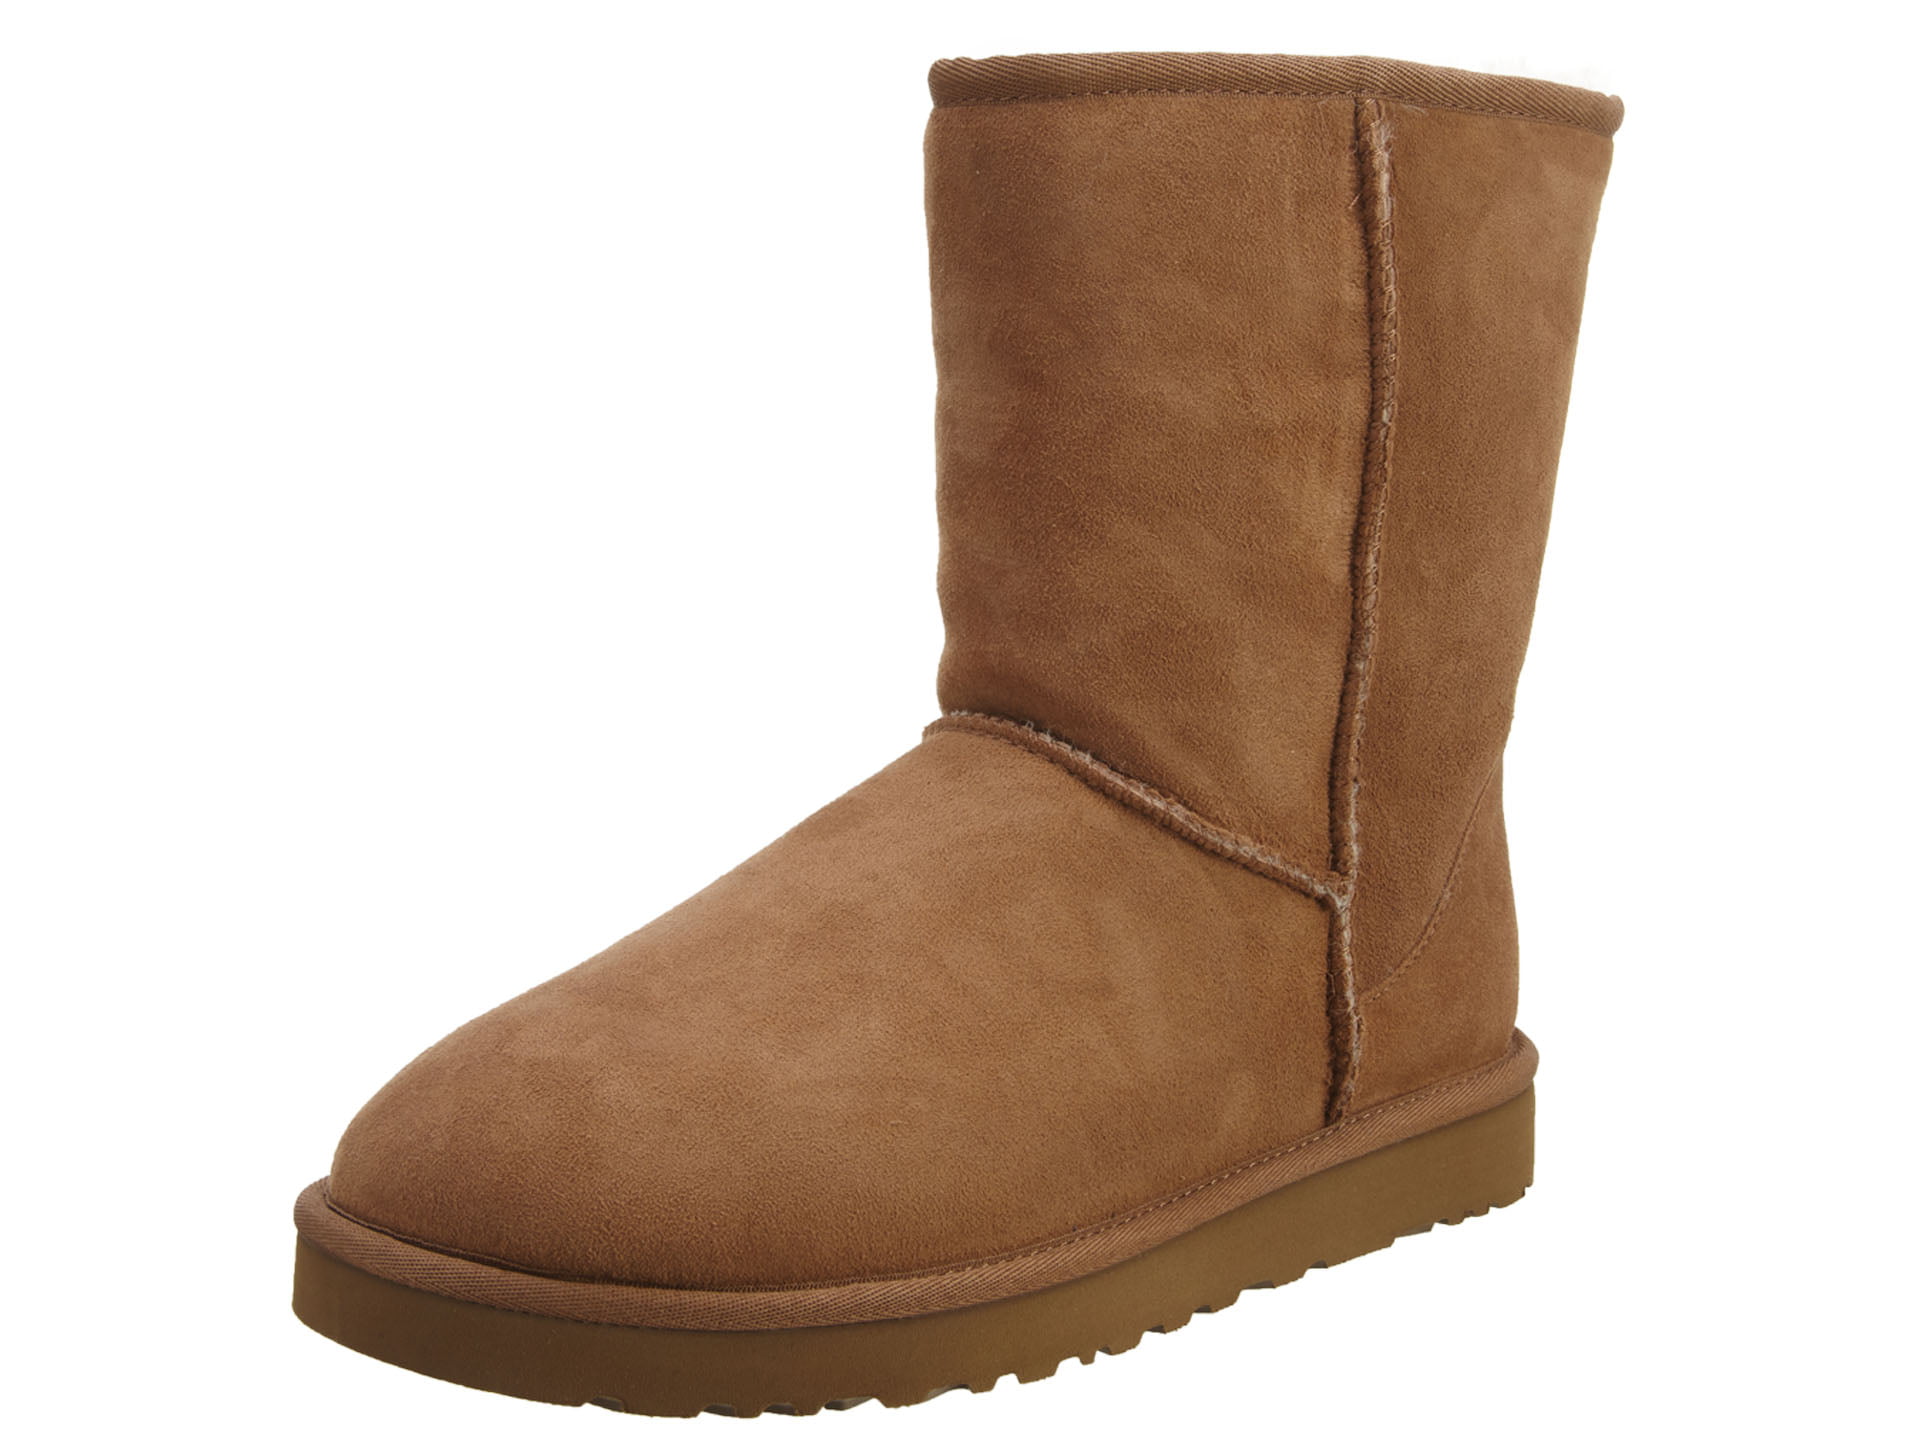 Ugg Classic Short Boots Womens Style 